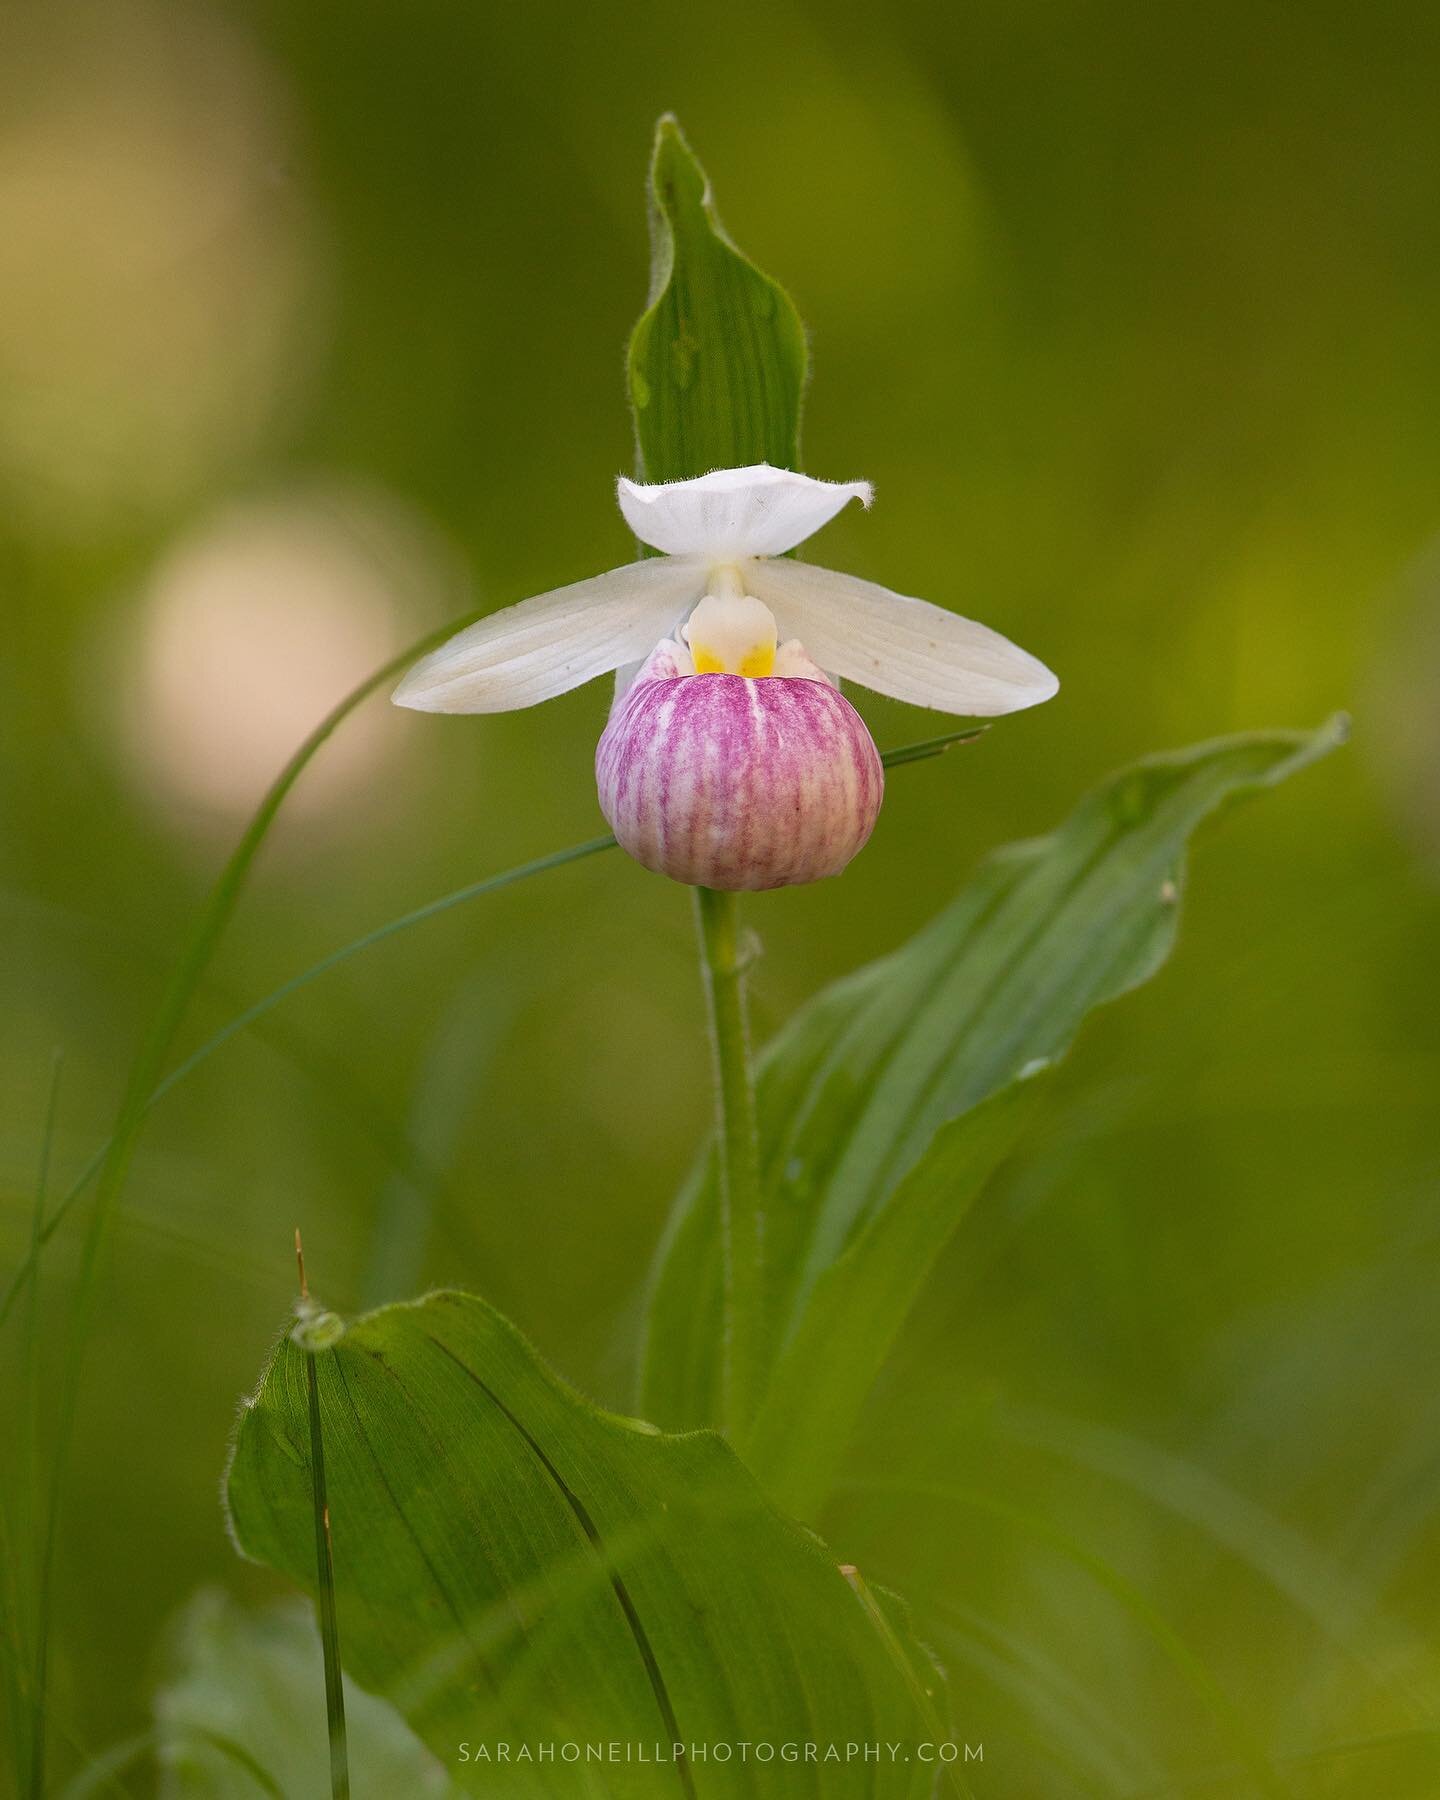 I took this image of the Lady&rsquo;s Slipper Orchids at the Purdon Conservation Area in Lanark Highlands. Over 10K can be found and the largest amount in Canada.  #showyladyslipper #orchid #ontarioplants #lanarkcounty #mississippivalleyconservationa